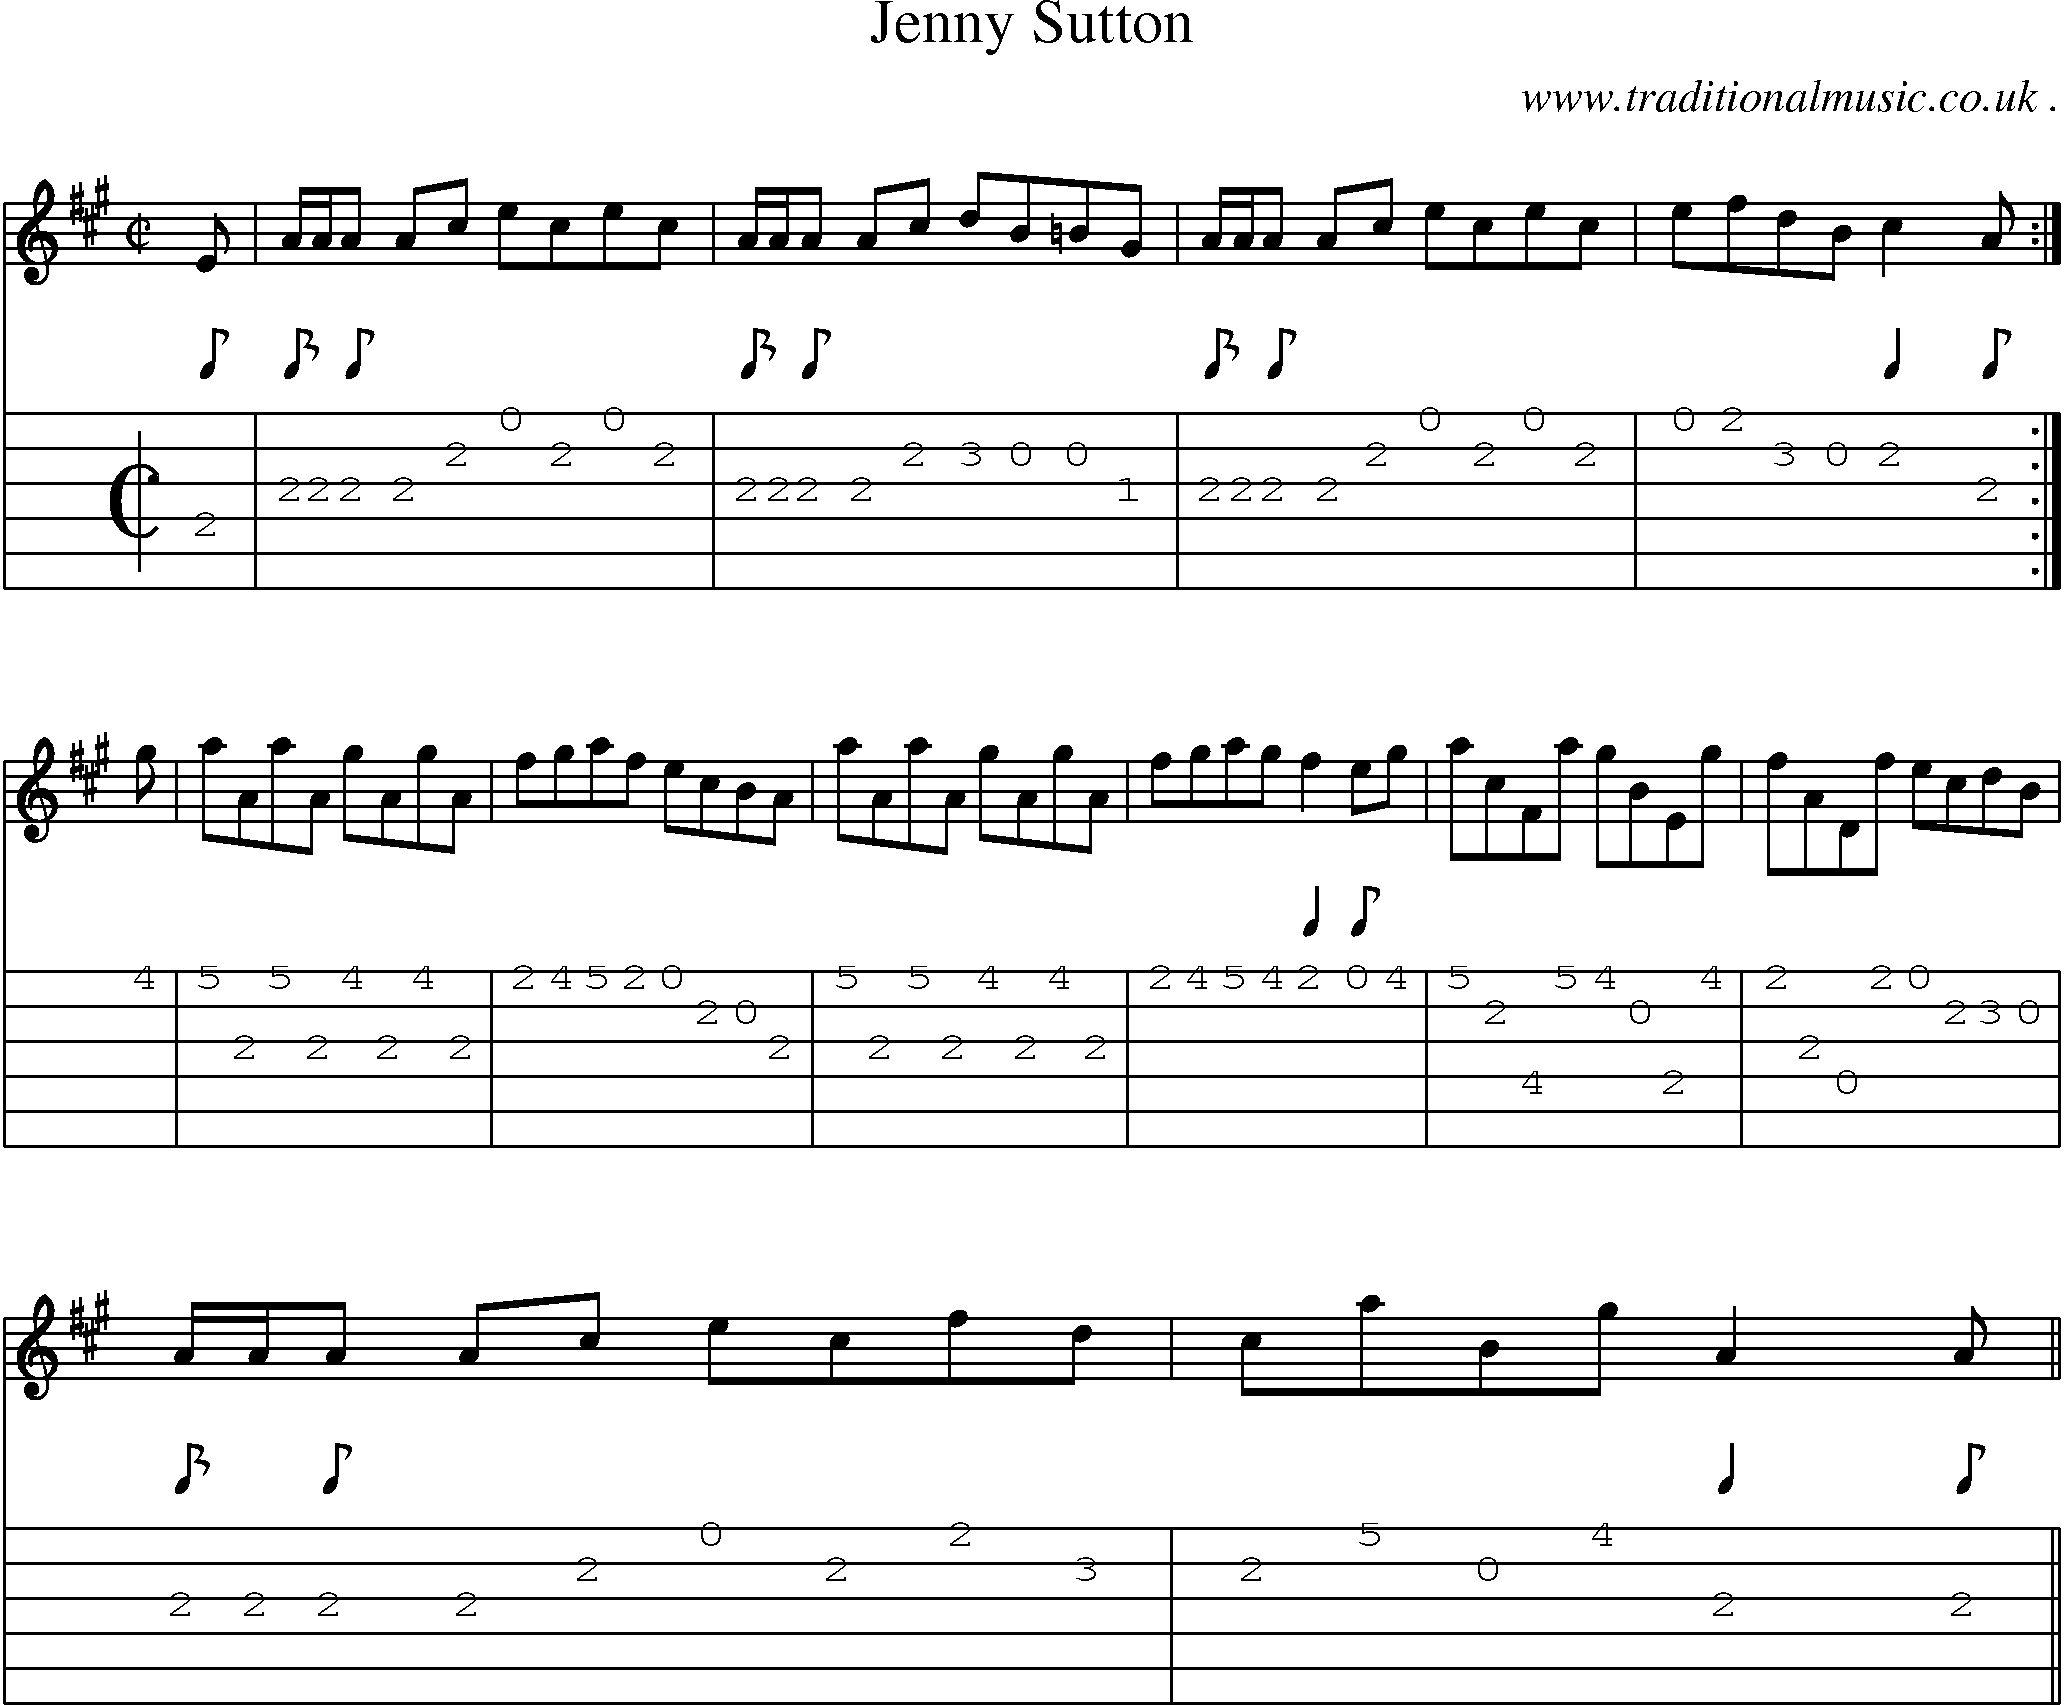 Sheet-music  score, Chords and Guitar Tabs for Jenny Sutton